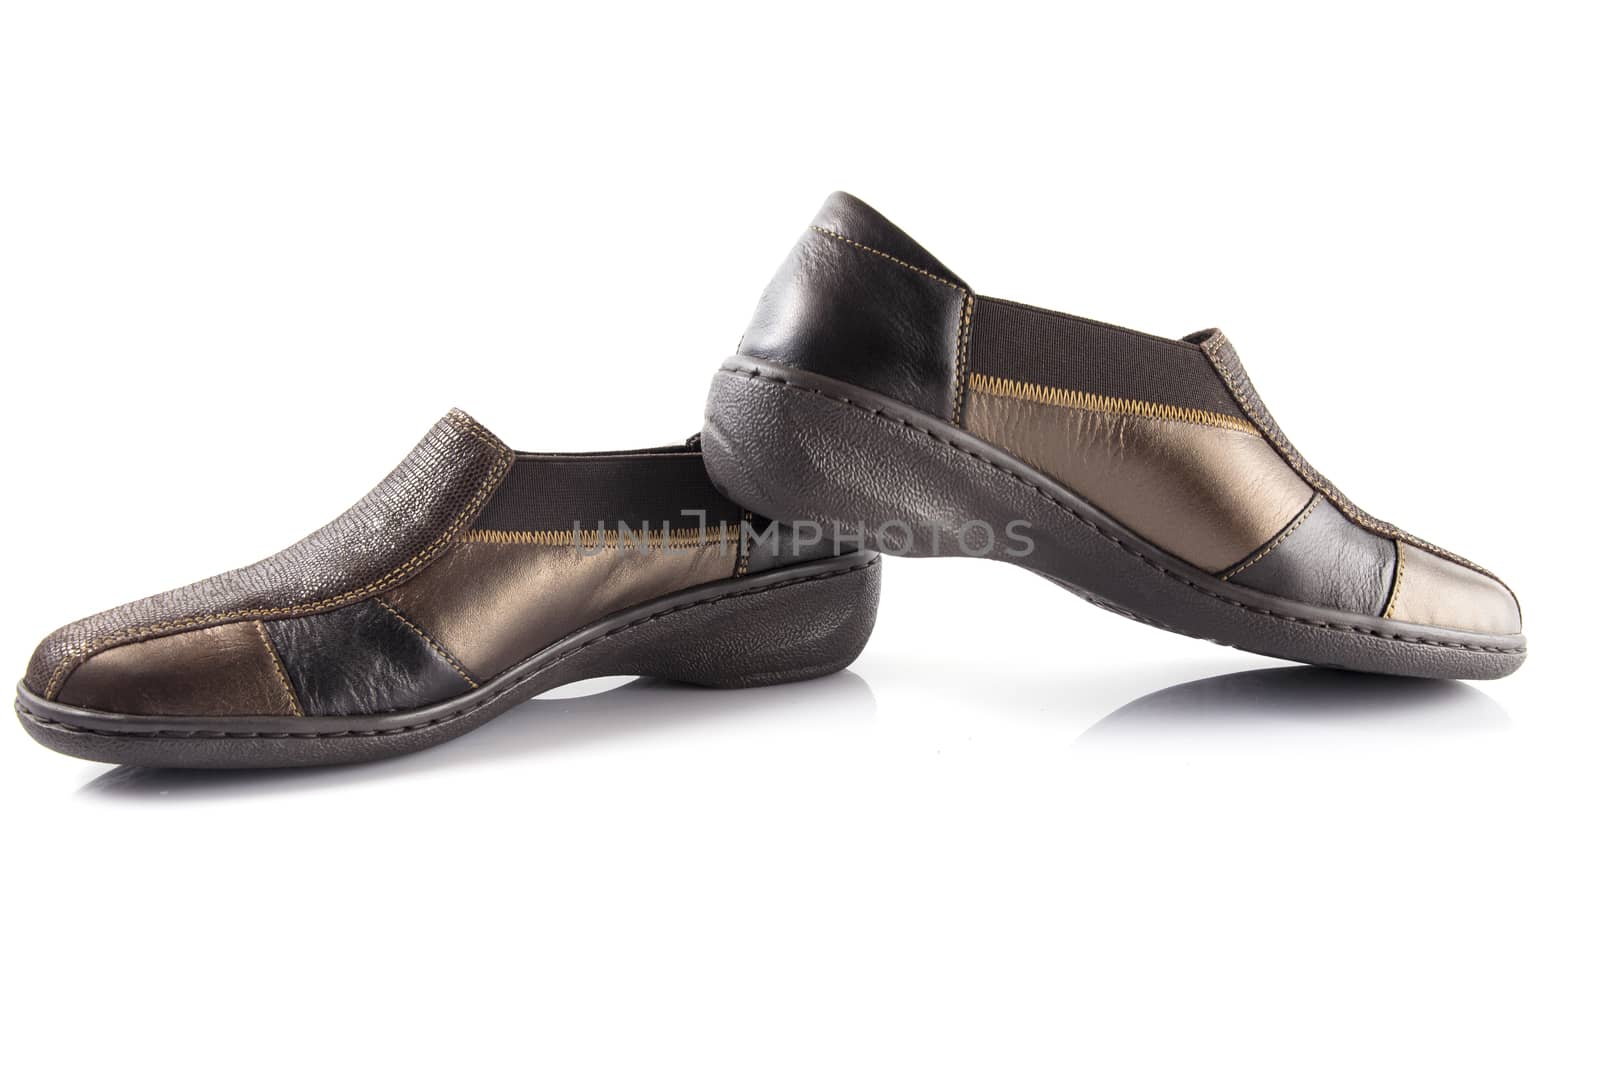 Pair of brown shoe on white background, isolated product.